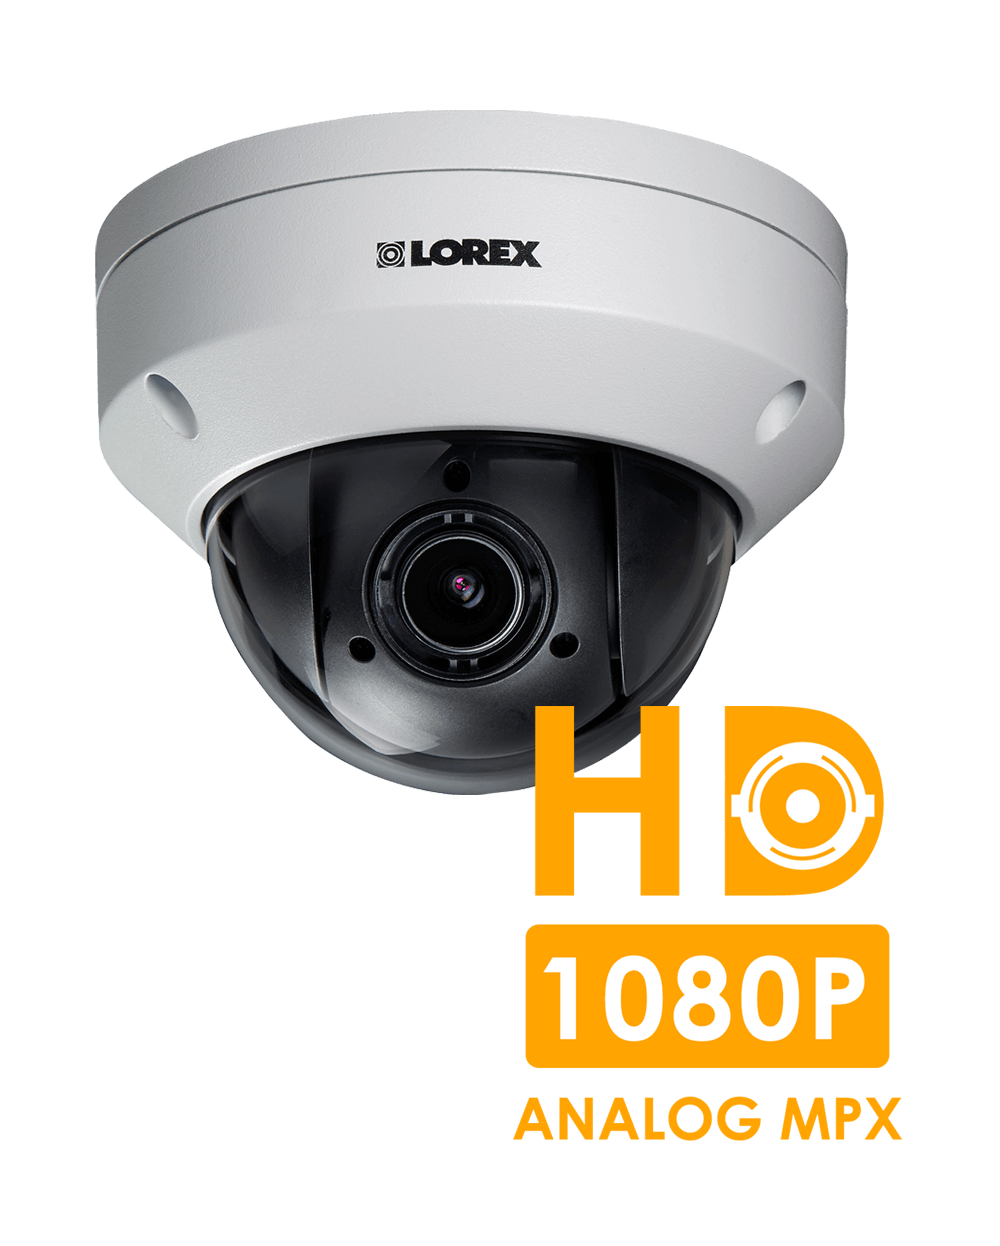 1080p HD security camera with PTZ